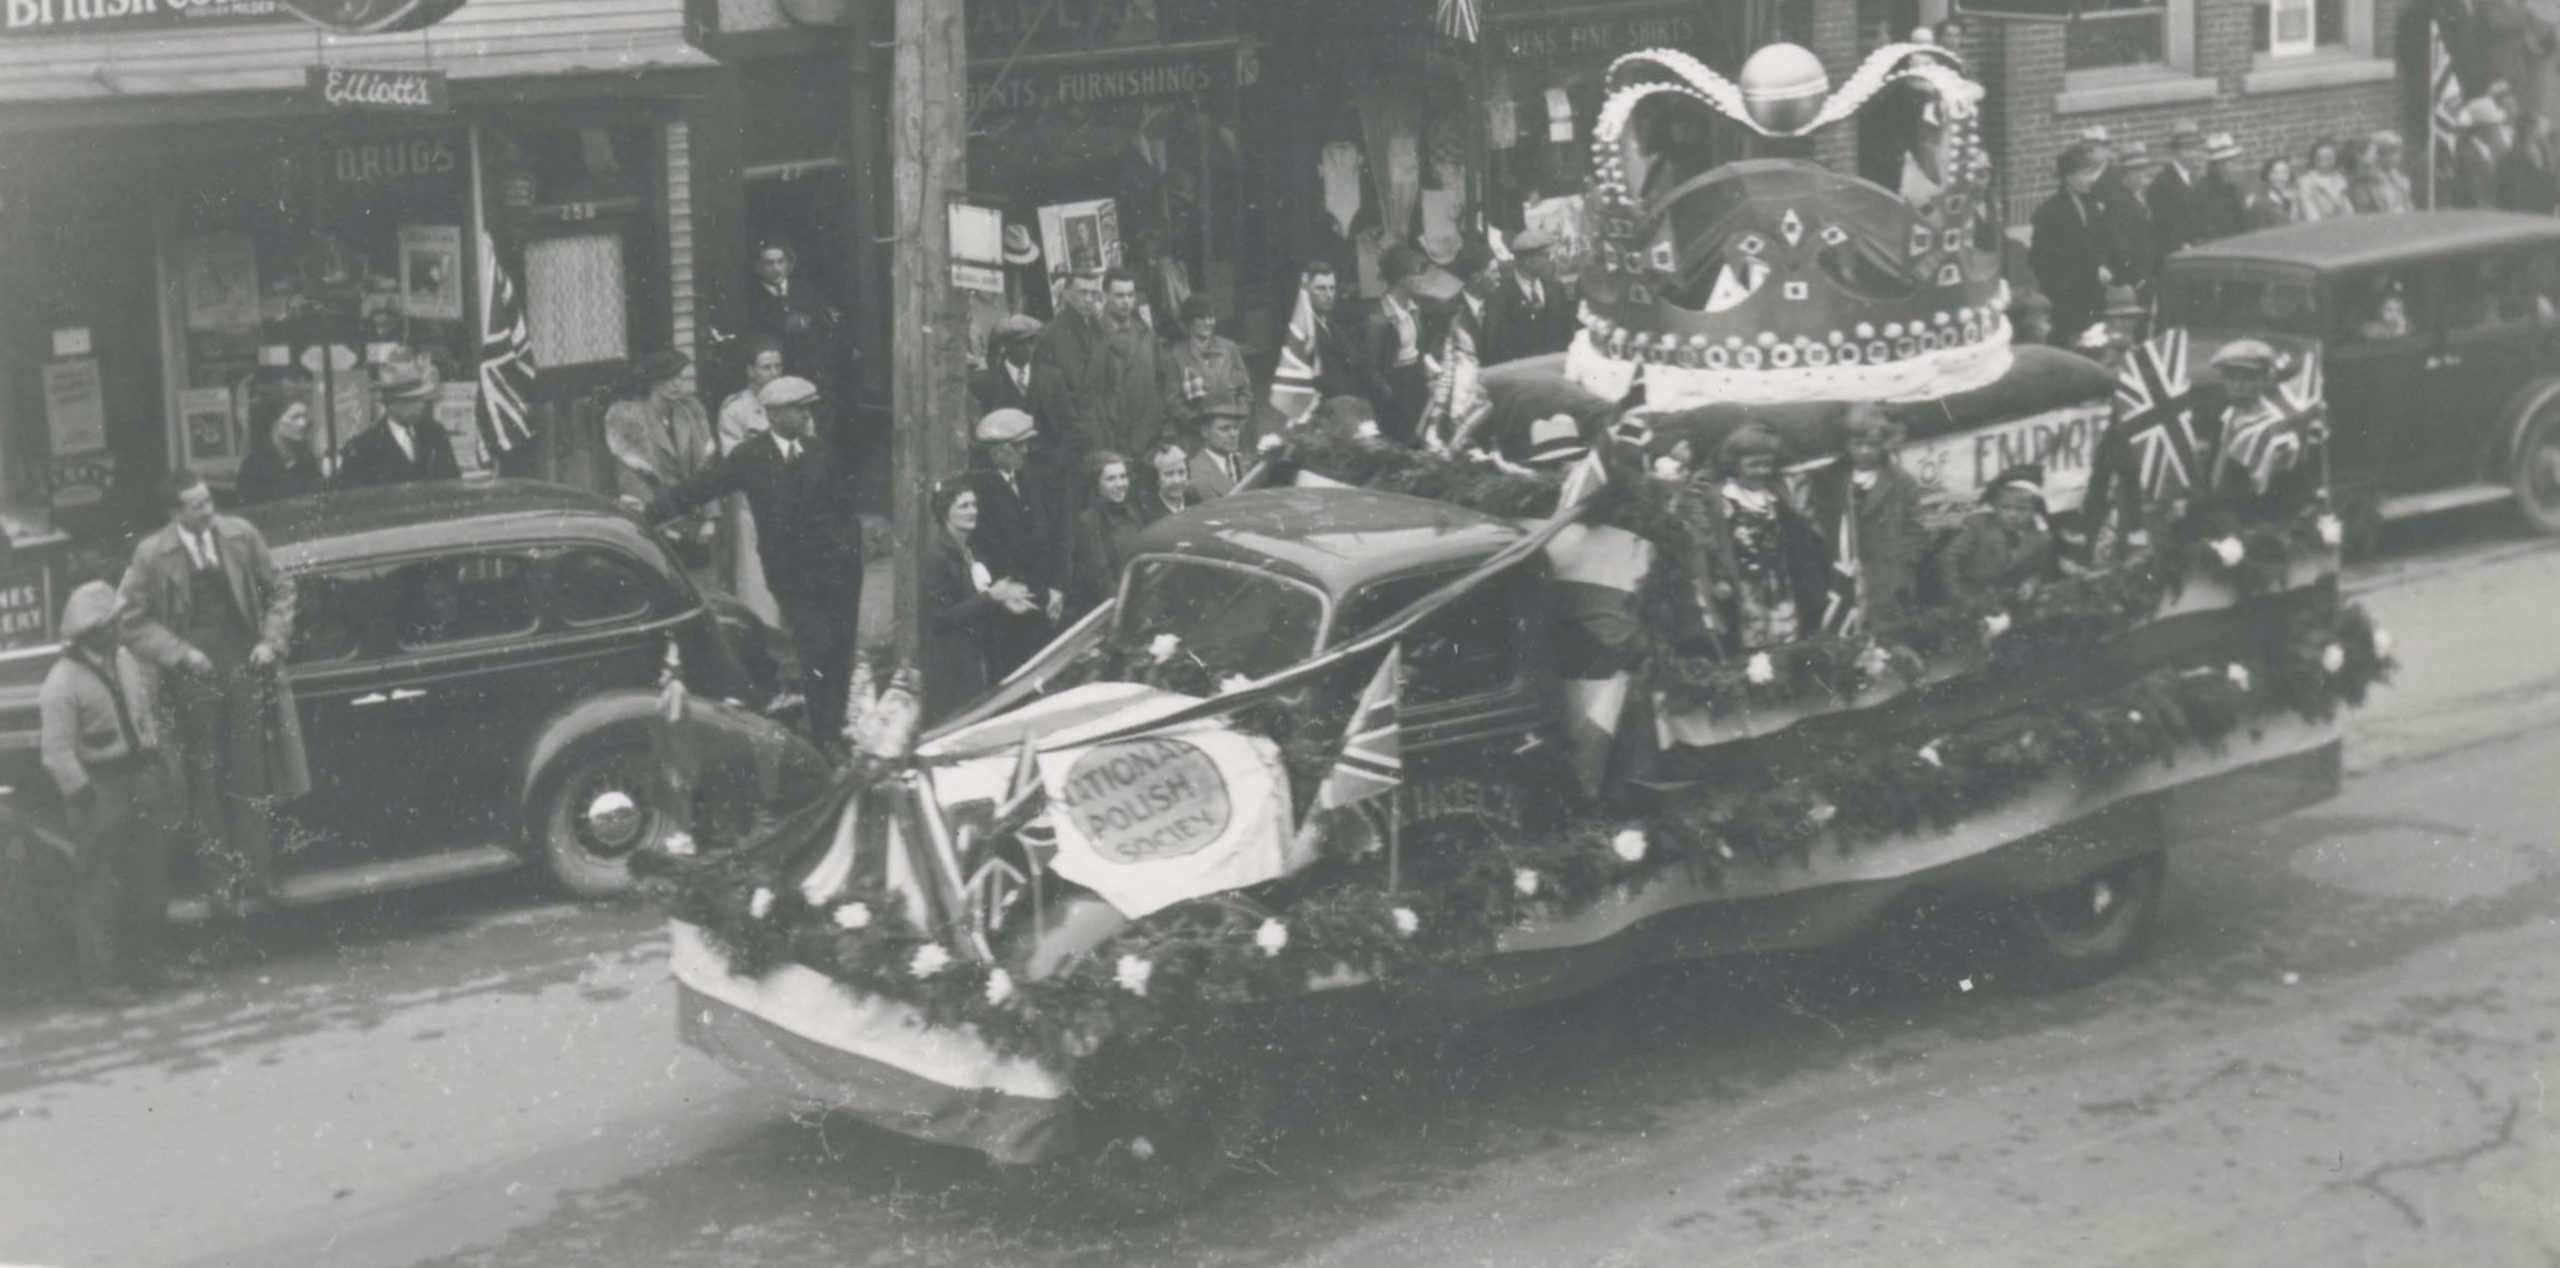 Black and white photograph of a truck in a parade, with people on the sidewalk.